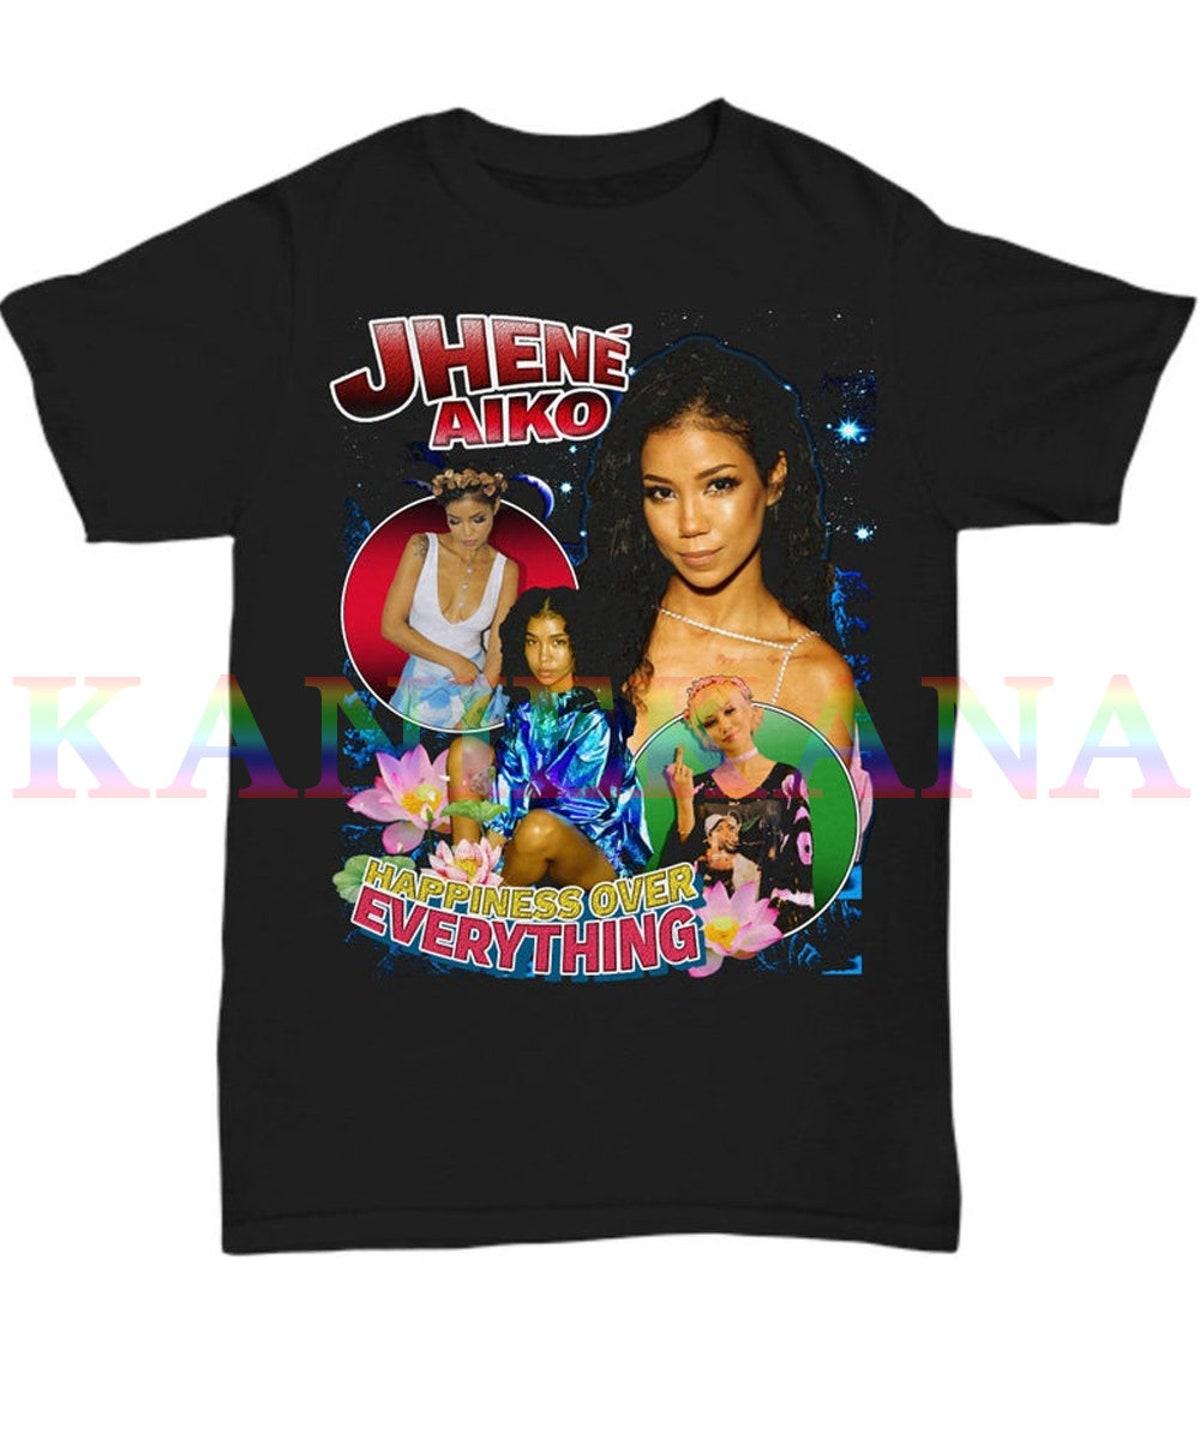 90s Retro Style Romance Film Waiting To Exhale Shirt Gift For Fans